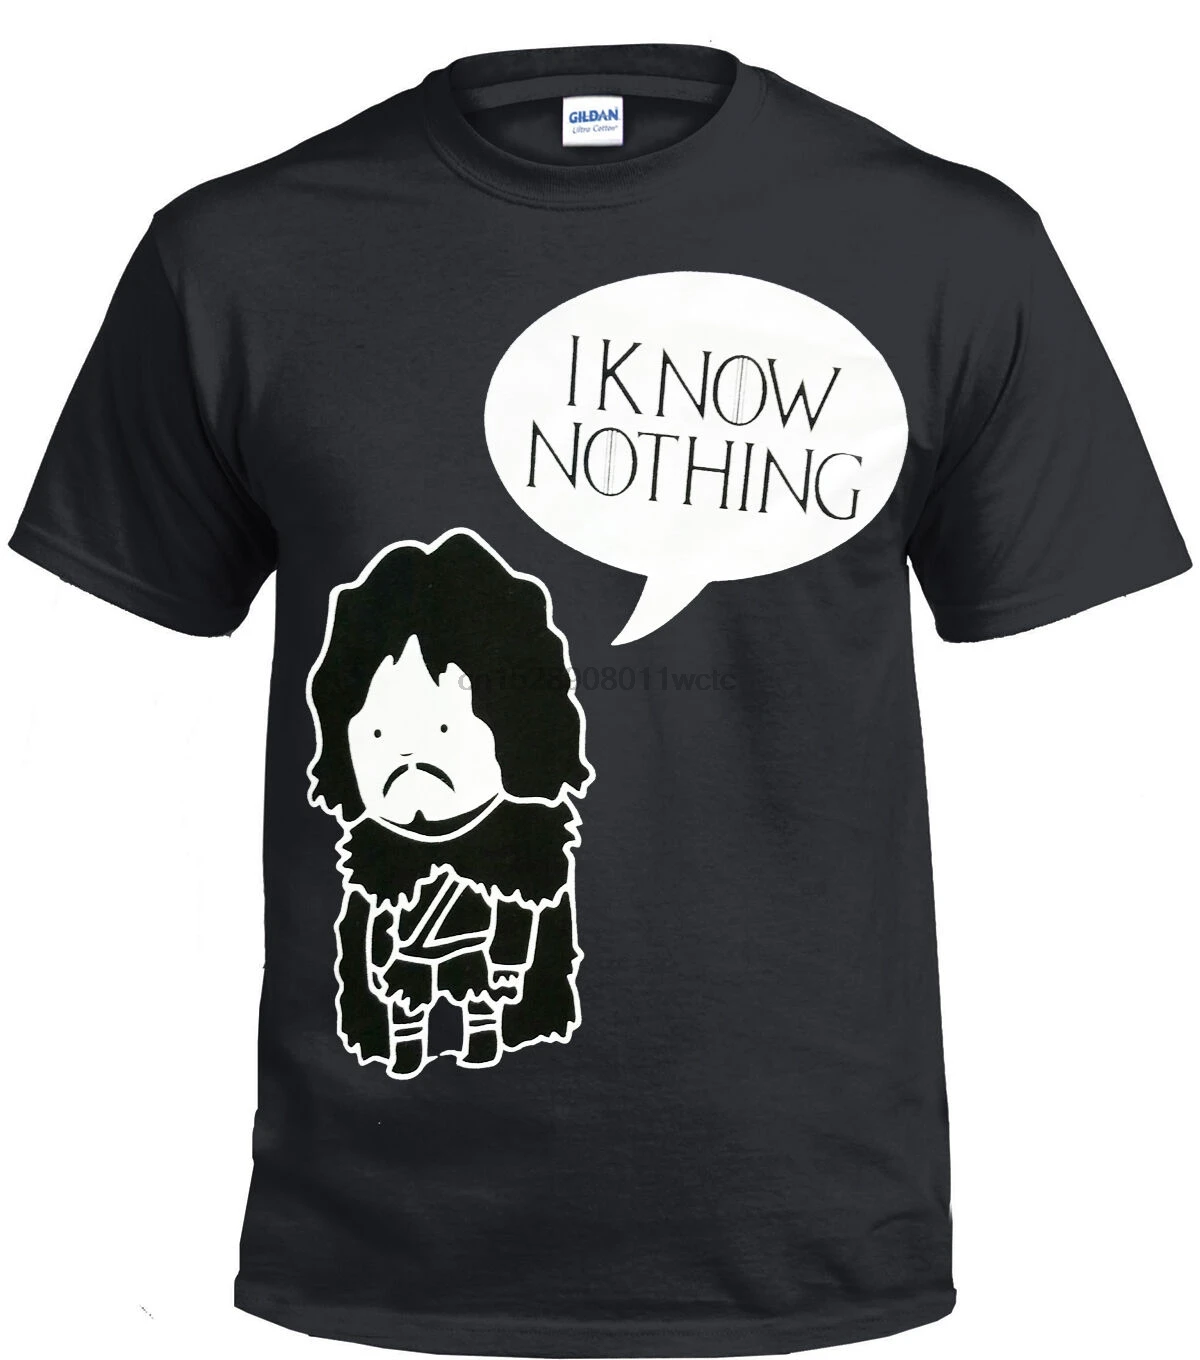 

NEW I KNOW NOTHING COTTON T SHIRT Game Of Thrones Jon Snow Funny Top Tee